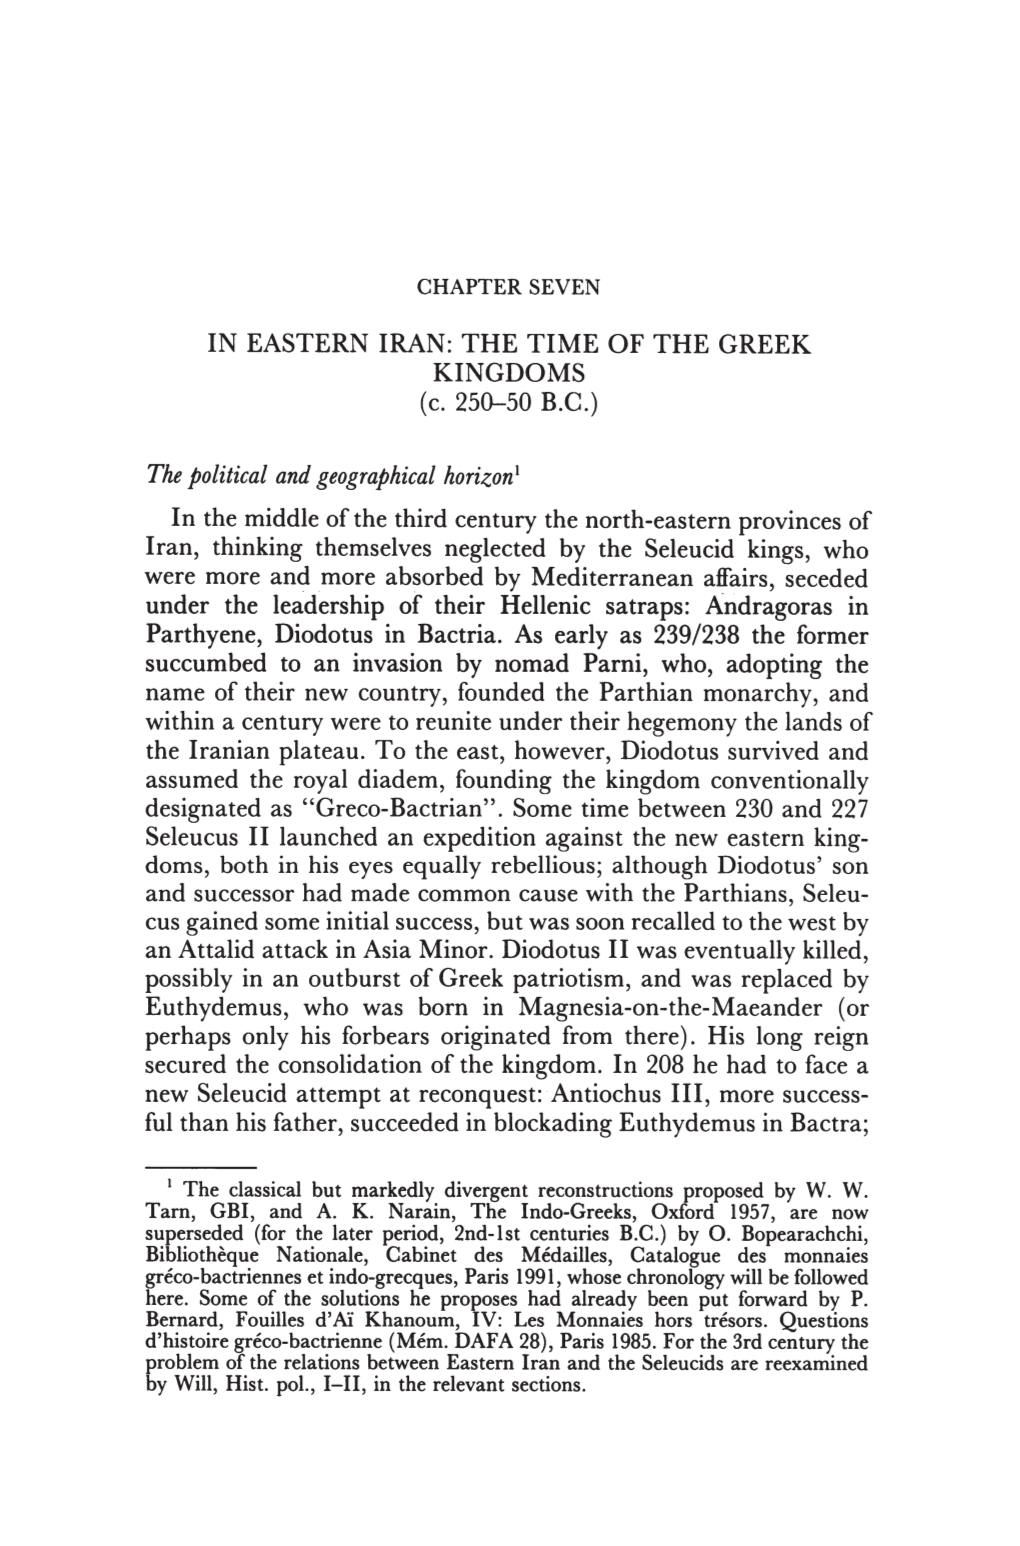 IN EASTERN IRAN: the TIME of the GREEK KINGDOMS (C